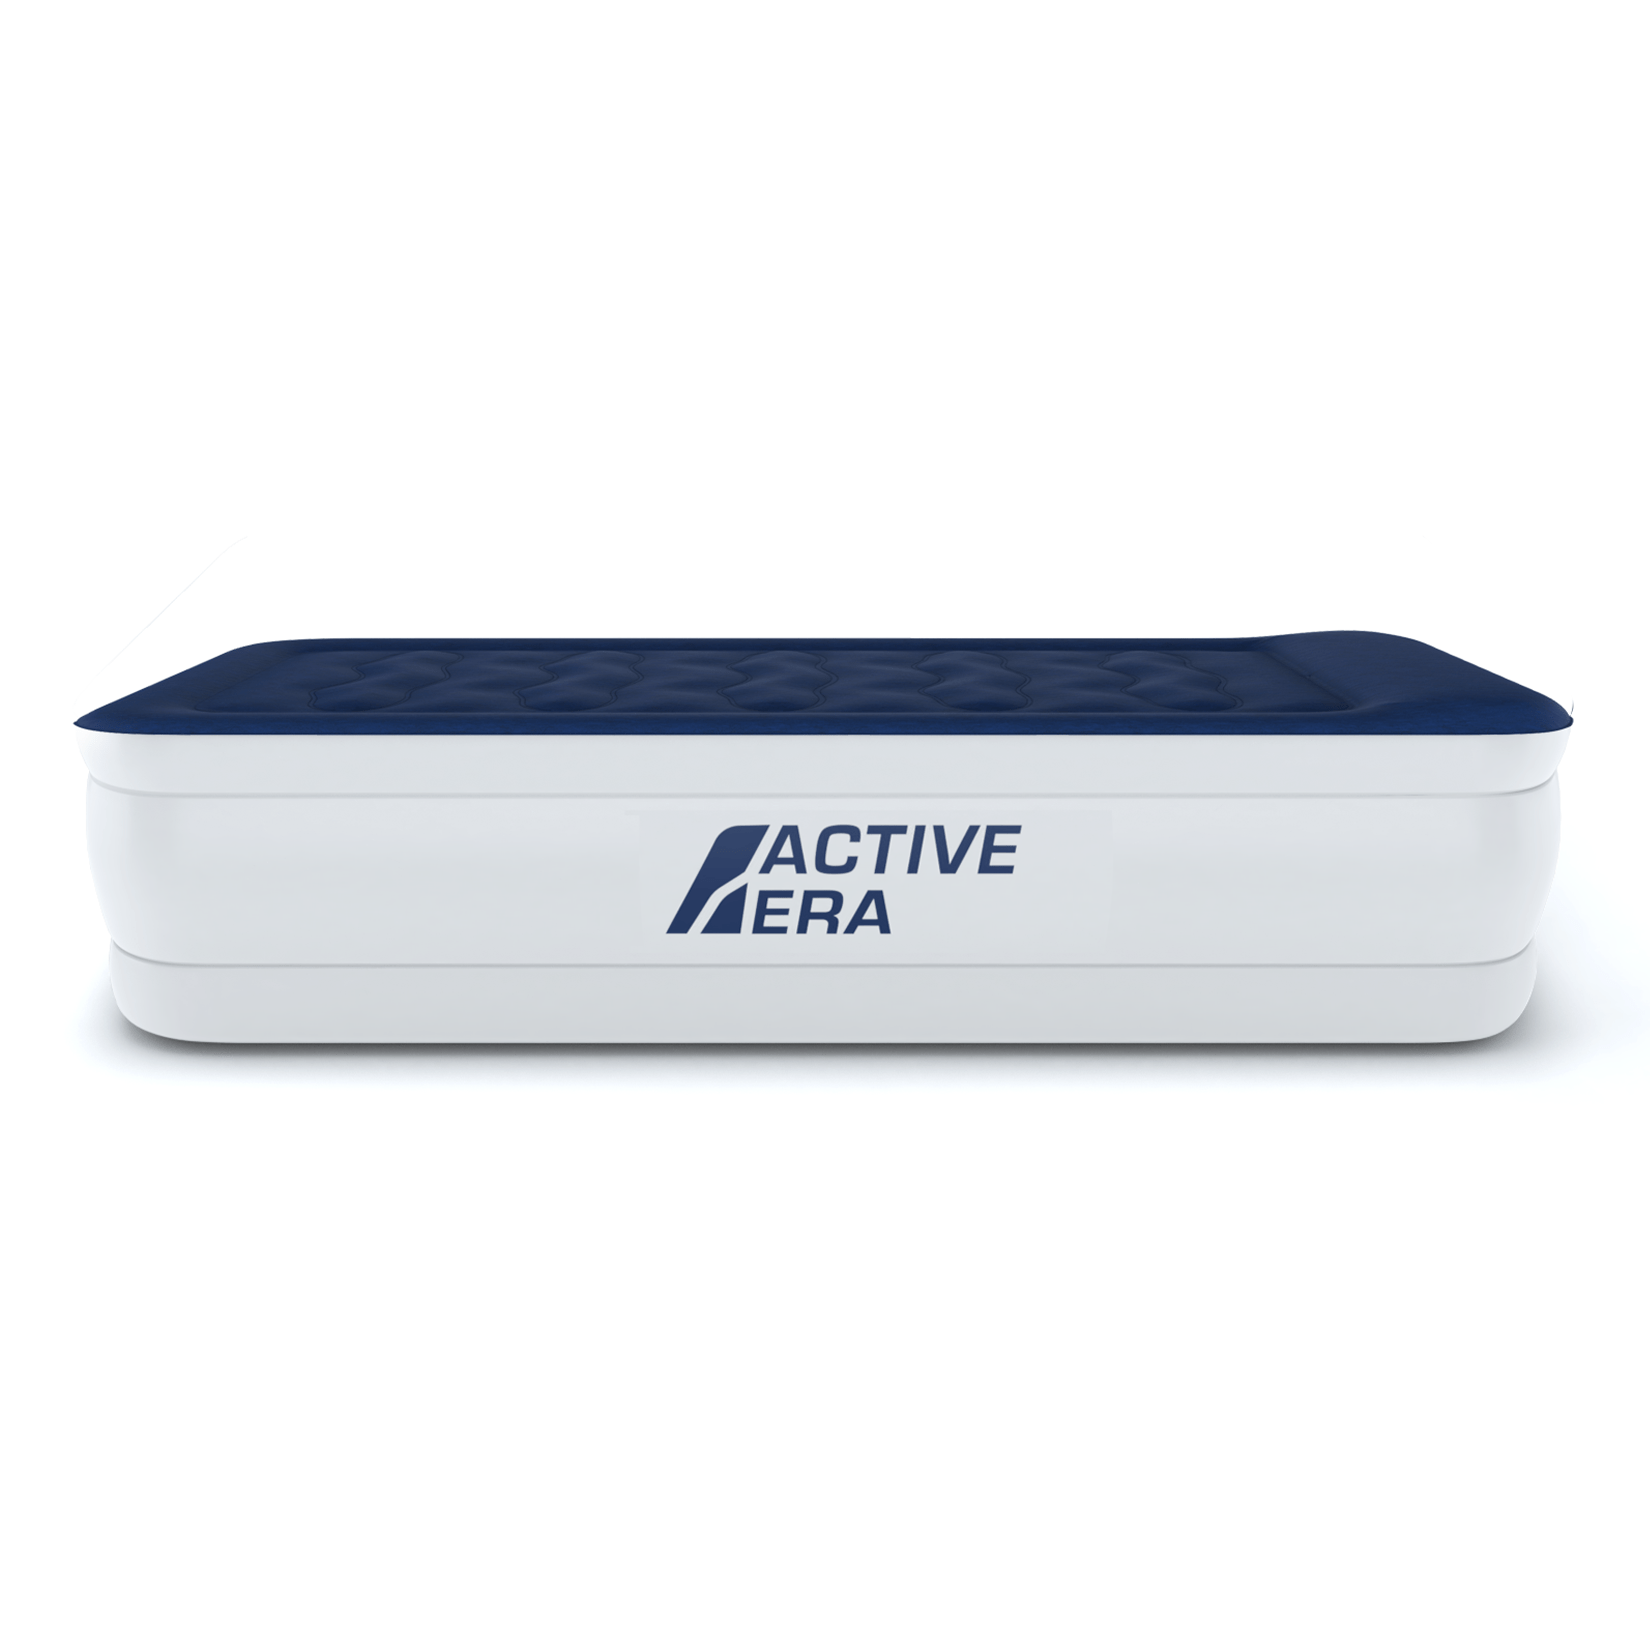 Single Comfort Plus Air Bed – Navy/White